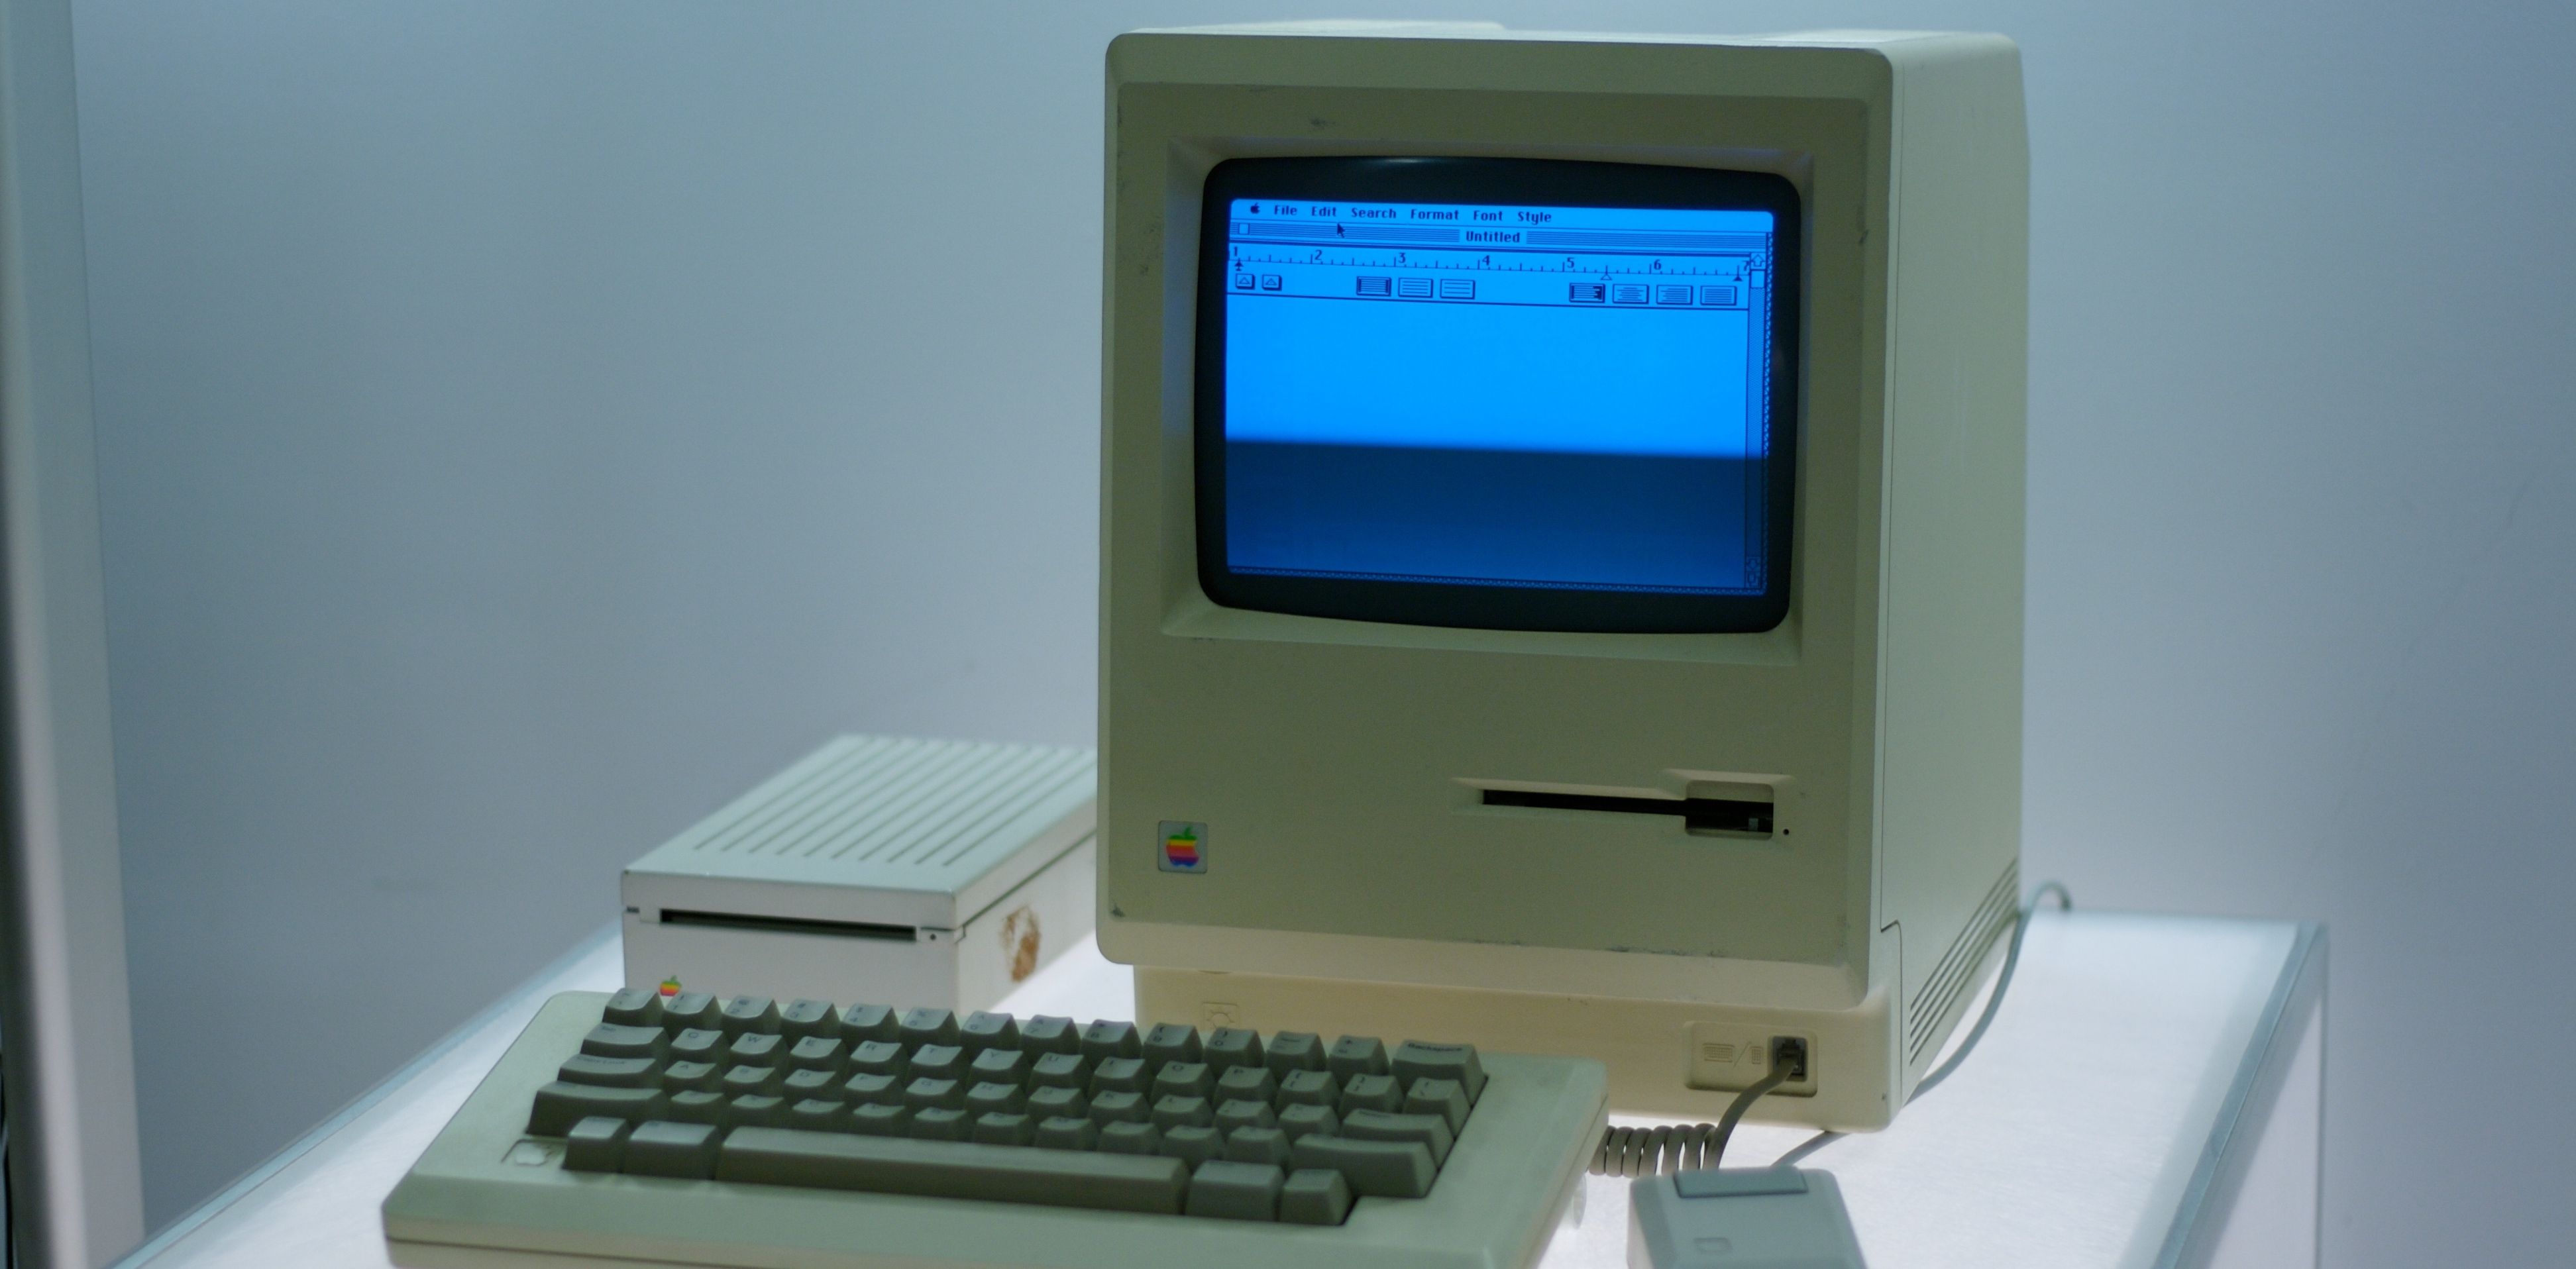 Macintosh computer in a display case